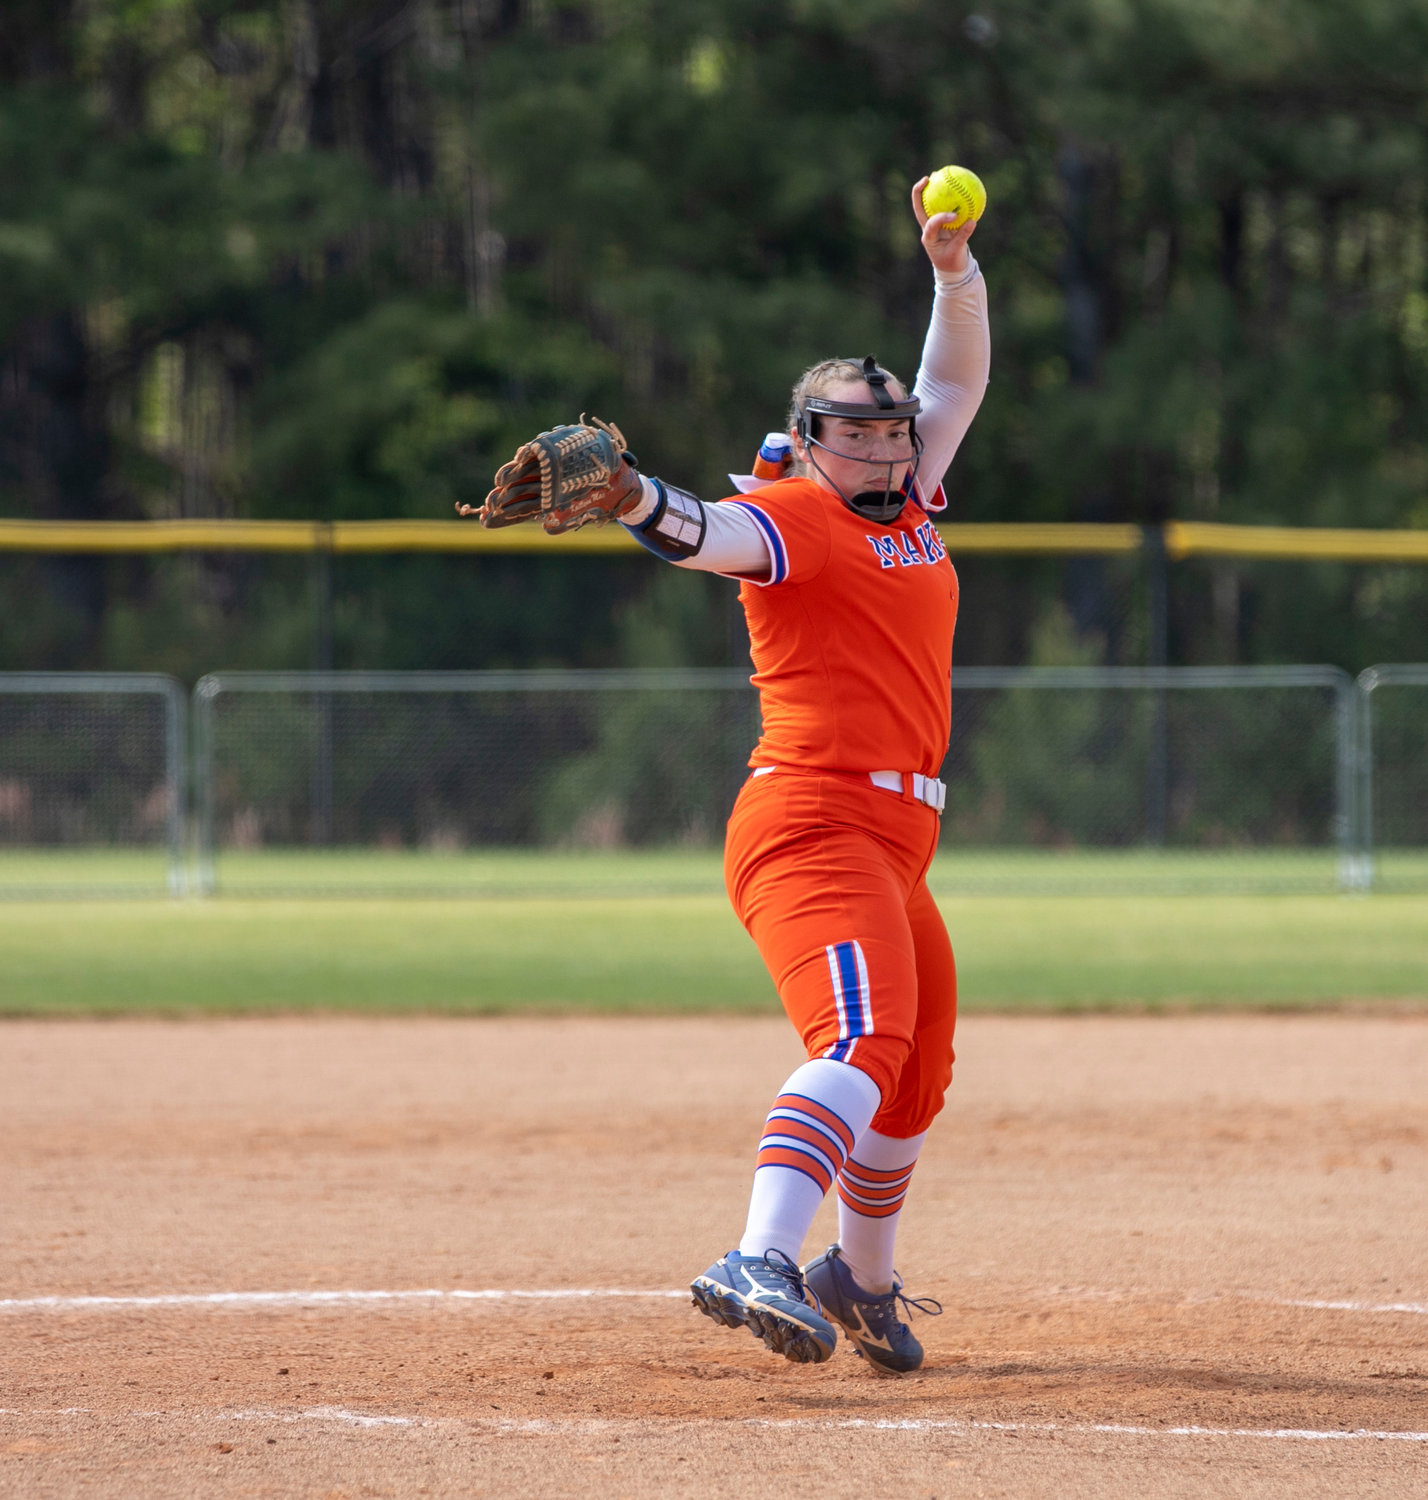 Kaitlynn Robertson winds up a pitch during the Orange Beach Makos’ Gulf Coast Classic contest against Wakulla at the Gulf Shores Sportsplex Tuesday, March 21. Last weekend at the Alex Wilcox Memorial Tournament in Montgomery, Robertson helped Orange Beach to a Gold Bracket championship with a 73% strike percentage and 12 strikeouts compared to no walks in 23 innings pitched.